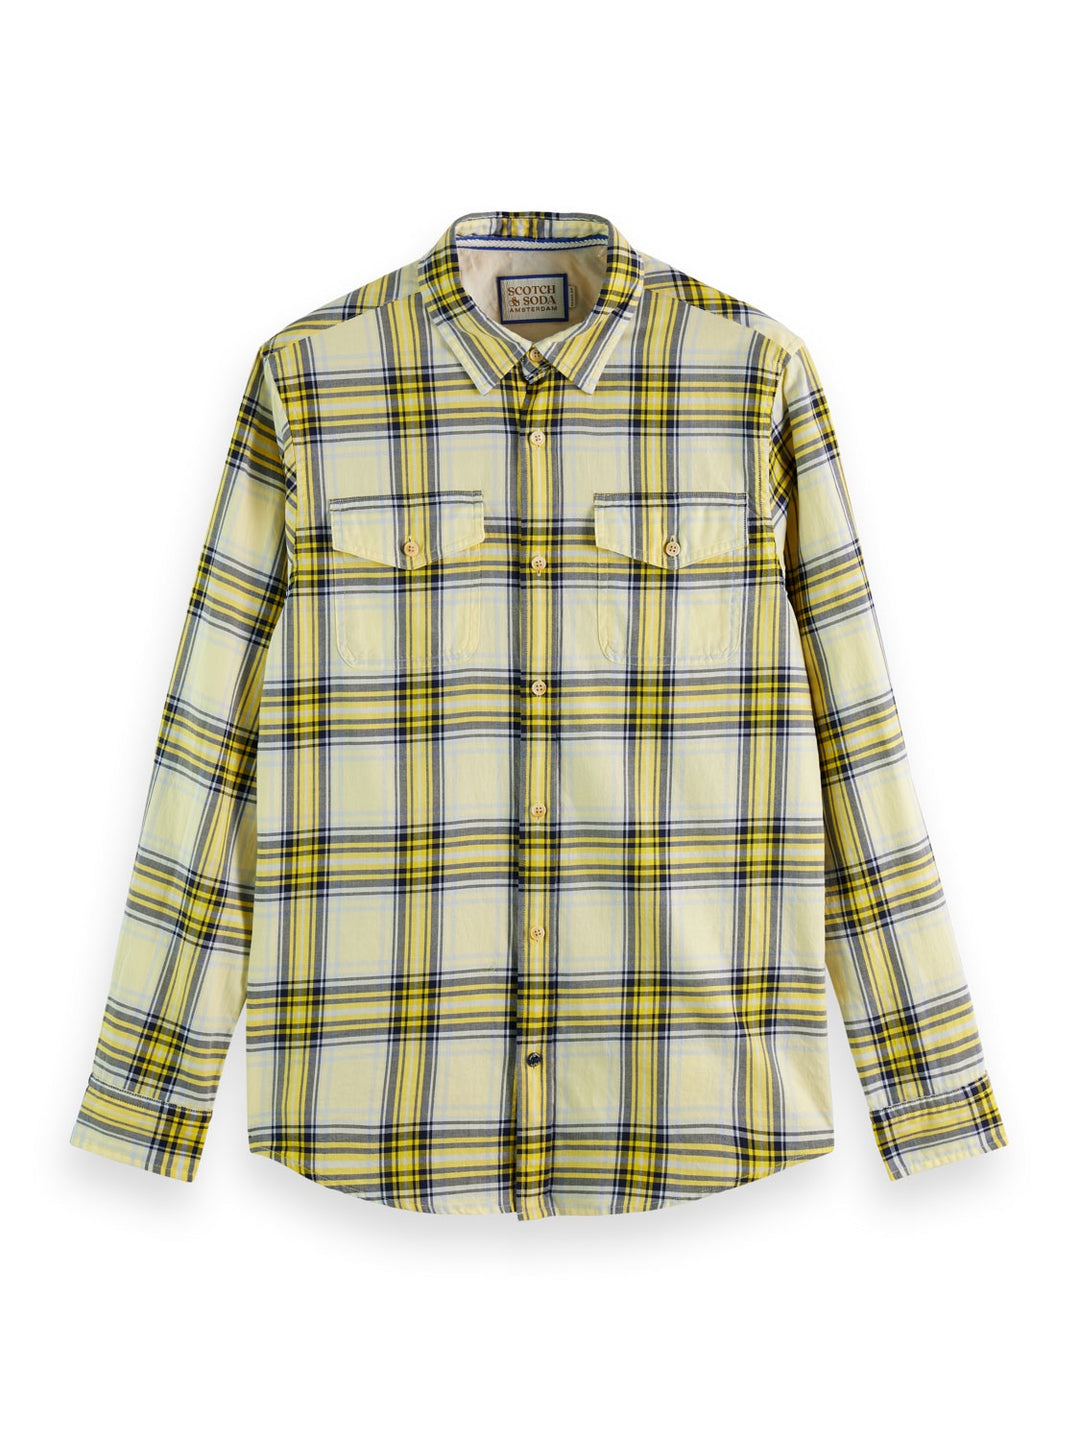 Regular Fit Flannel Check Shirt in Yellow Check | Buster McGee